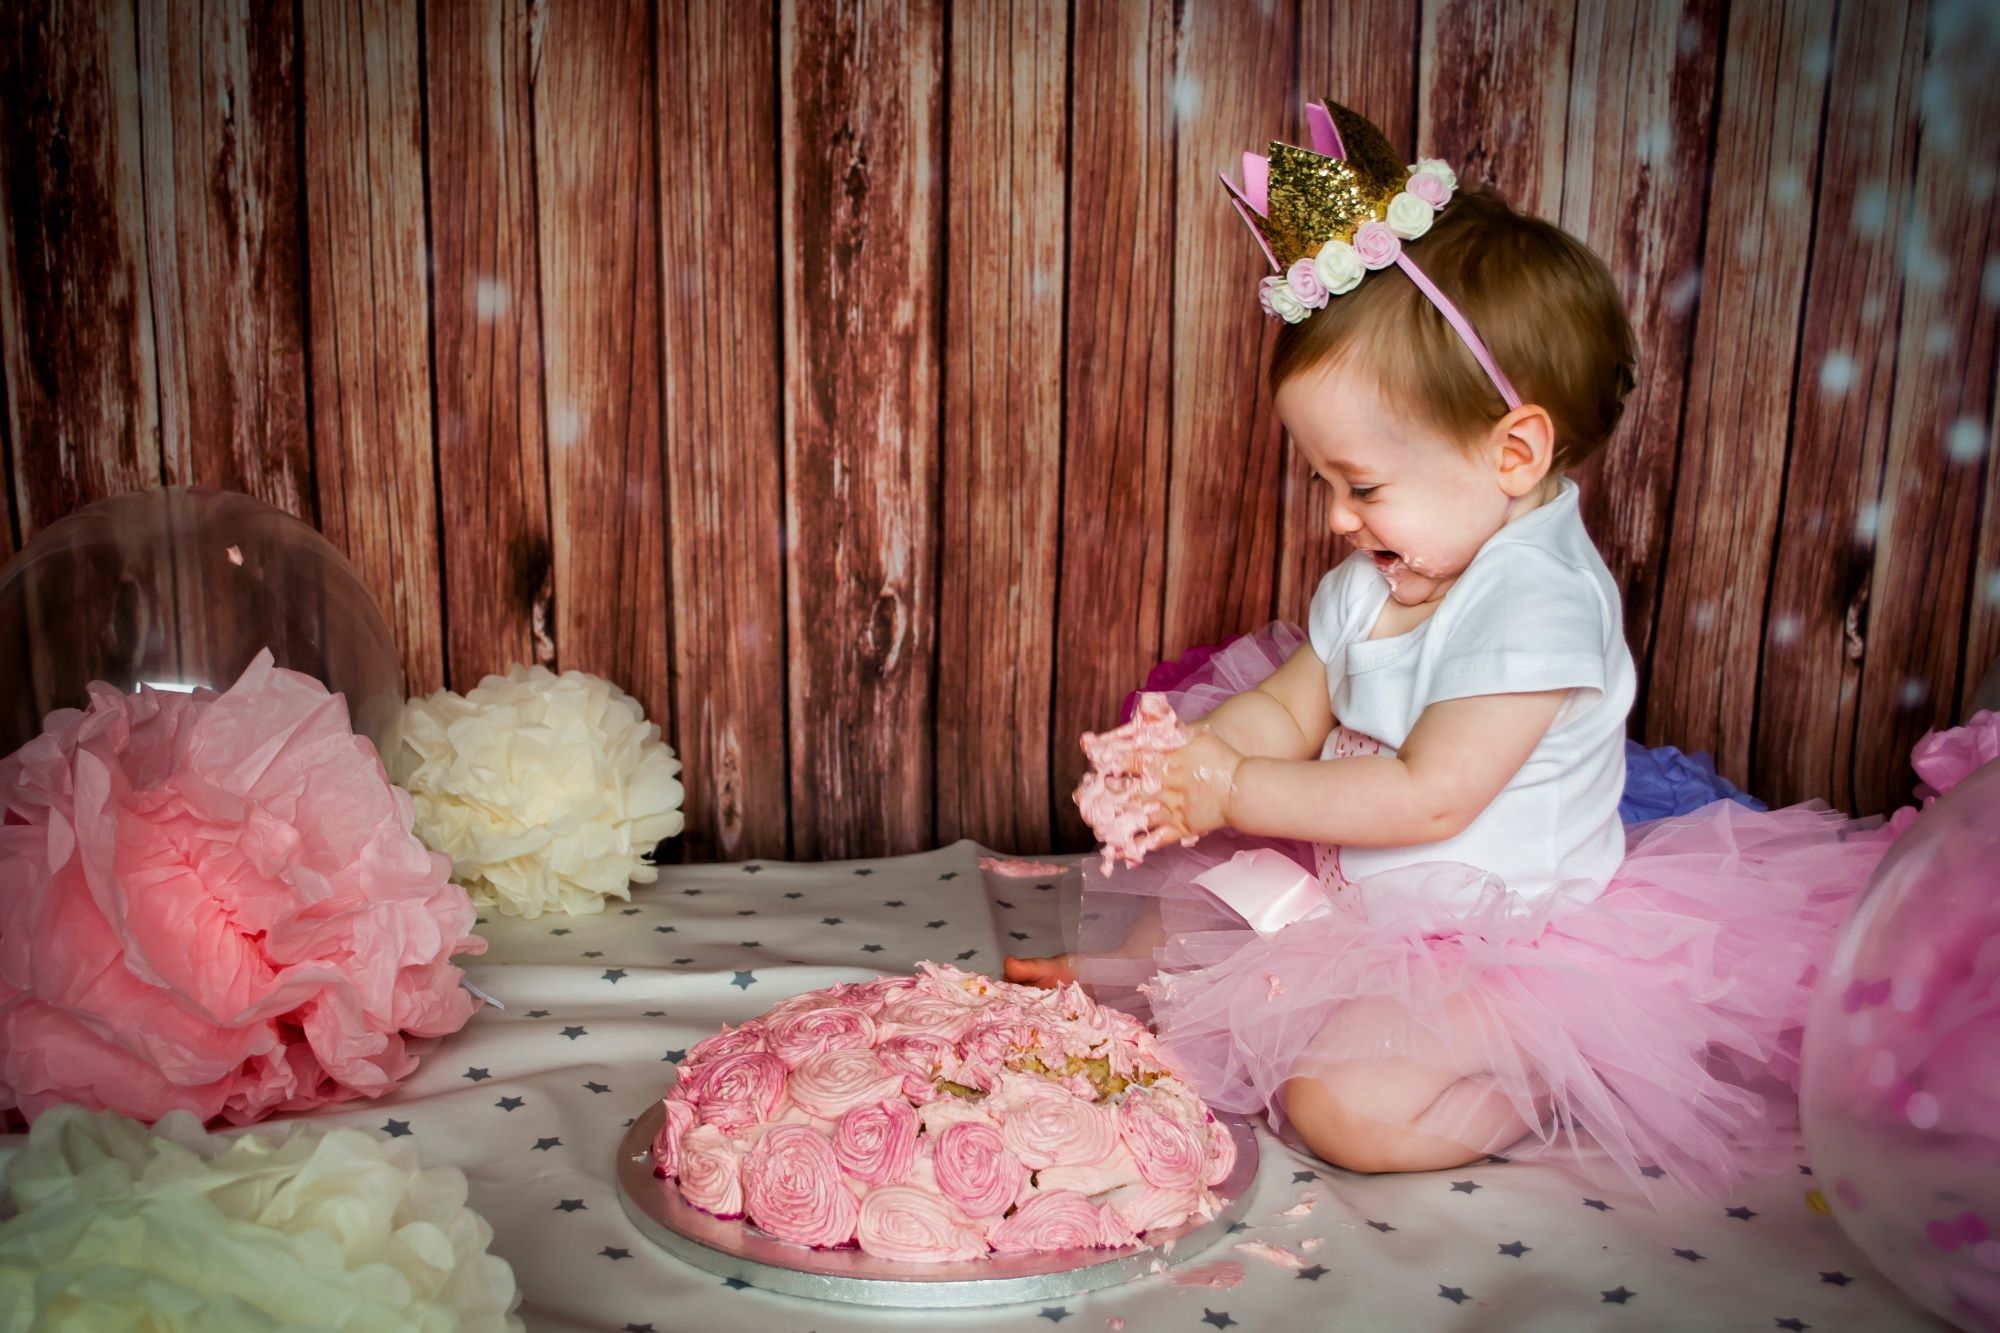 A little girl wears a white top and pink tutu and is sat by her pink birthday cake. She has her hands full of icing and is smushing it all over her fingers and arms